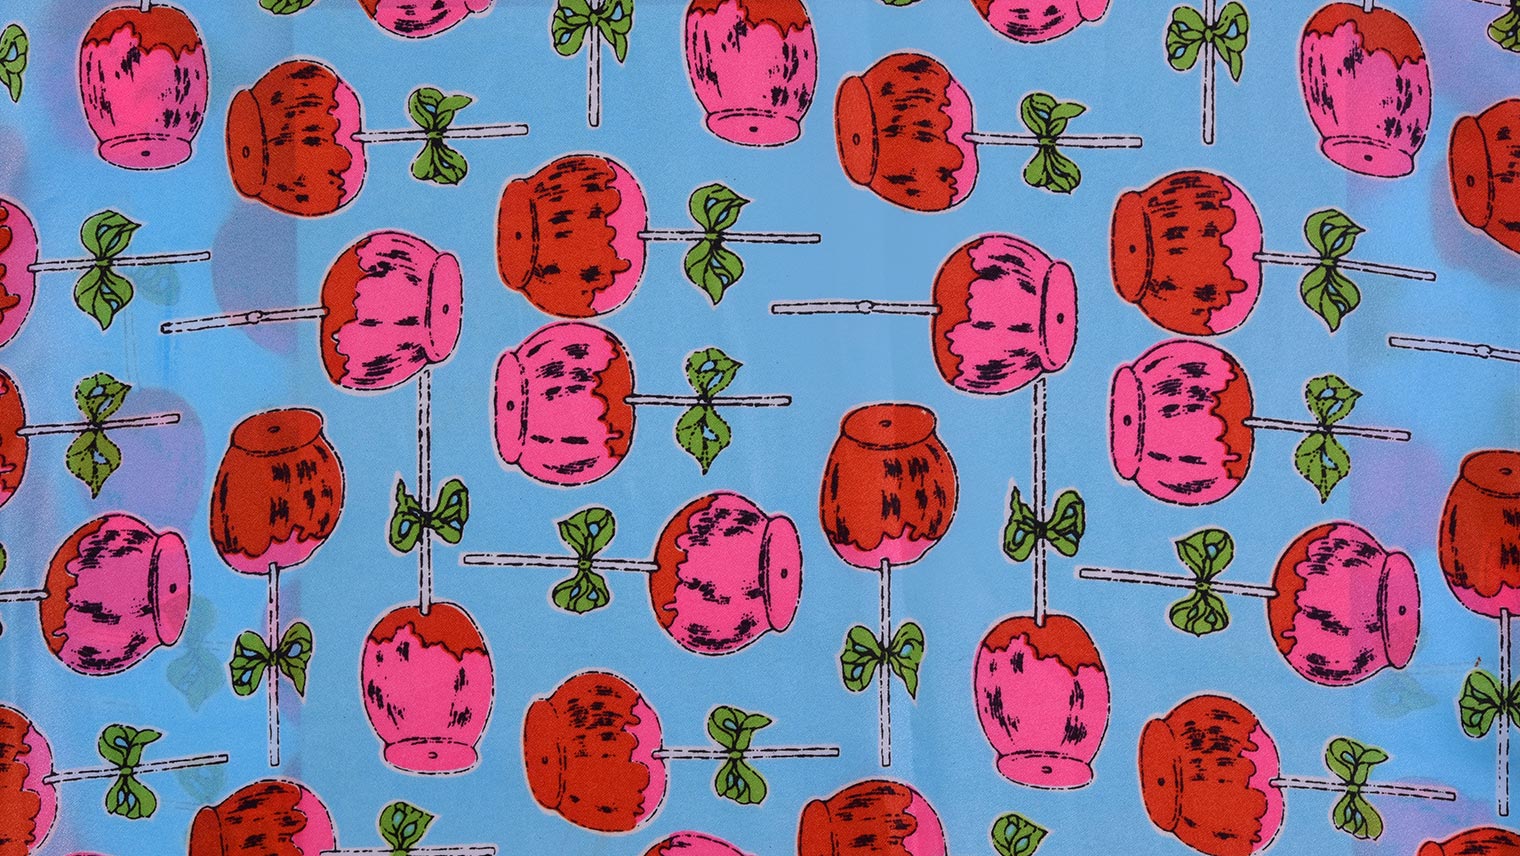 Andy Warhol: The Textiles | Fashion Textile Museum, London